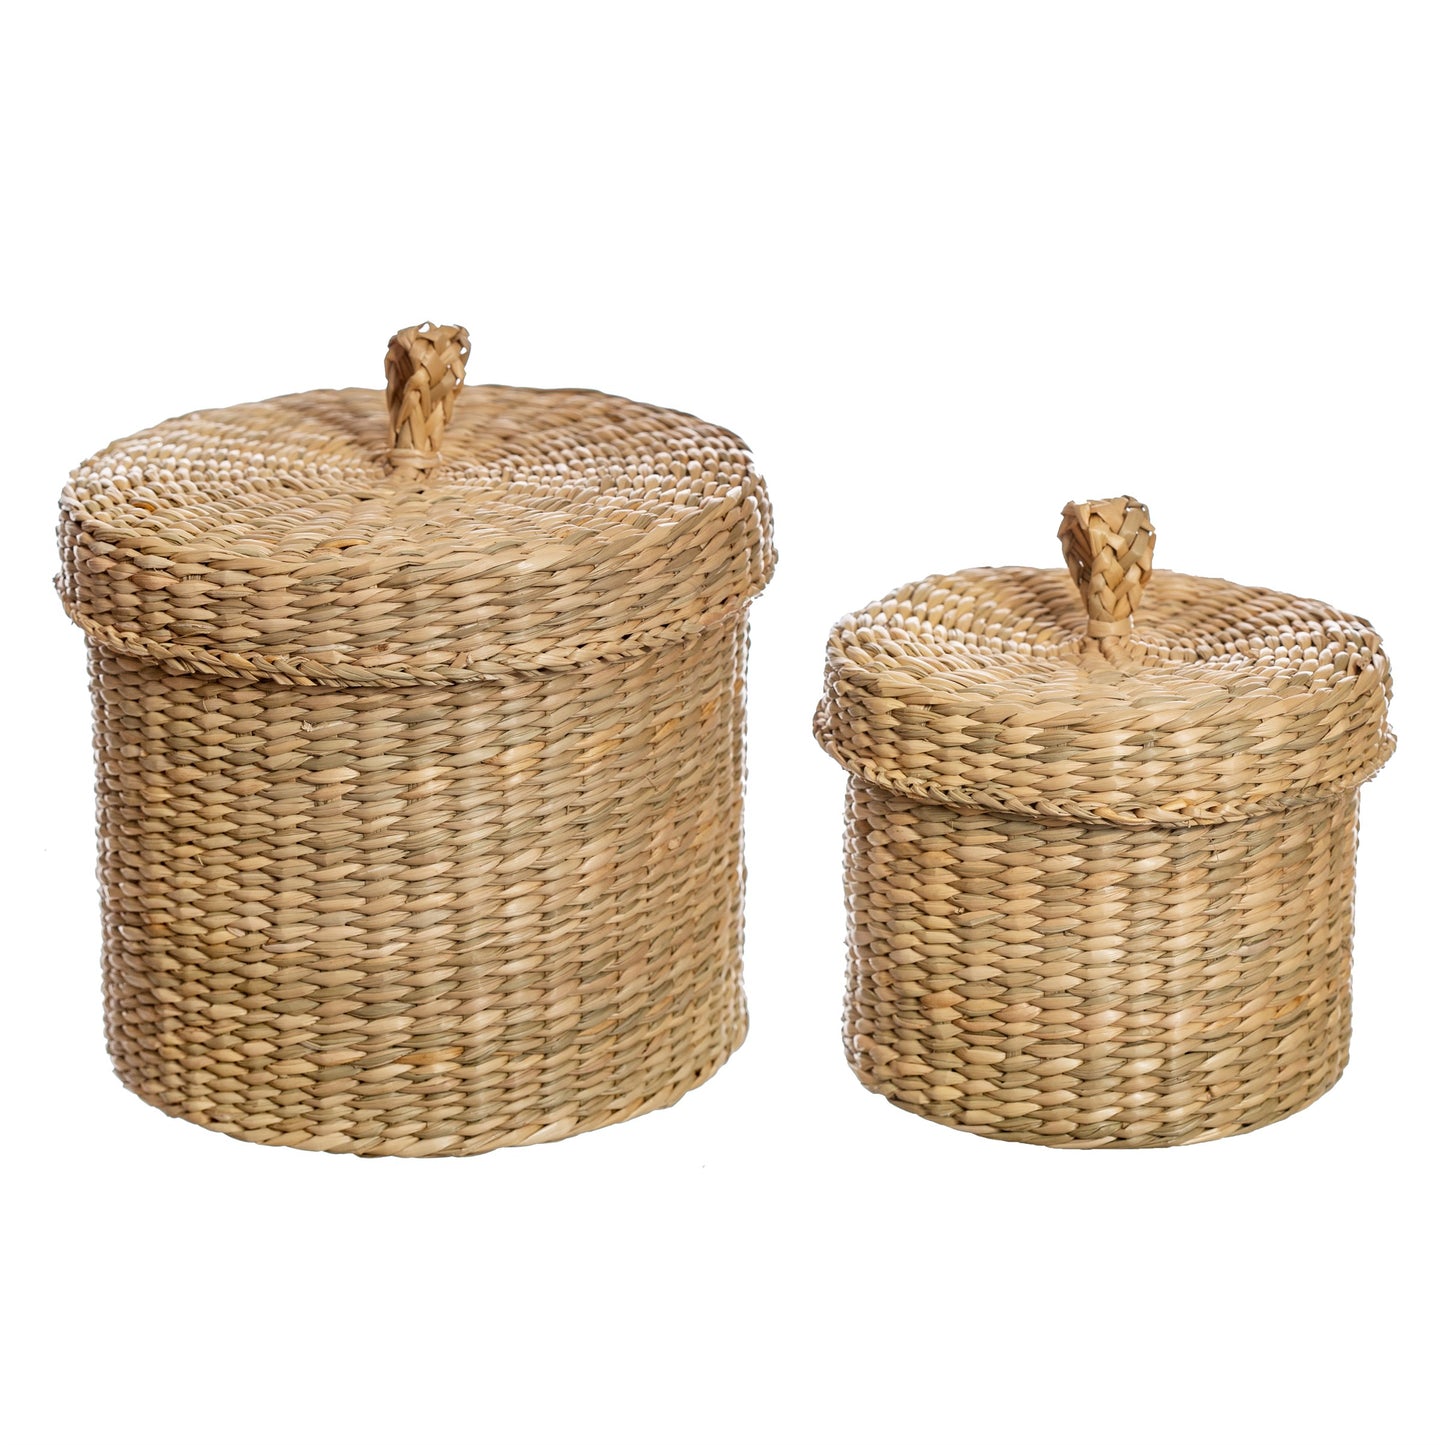 Sass & Belle Natural Seagrass Storage Baskets With Lids Set Of 2